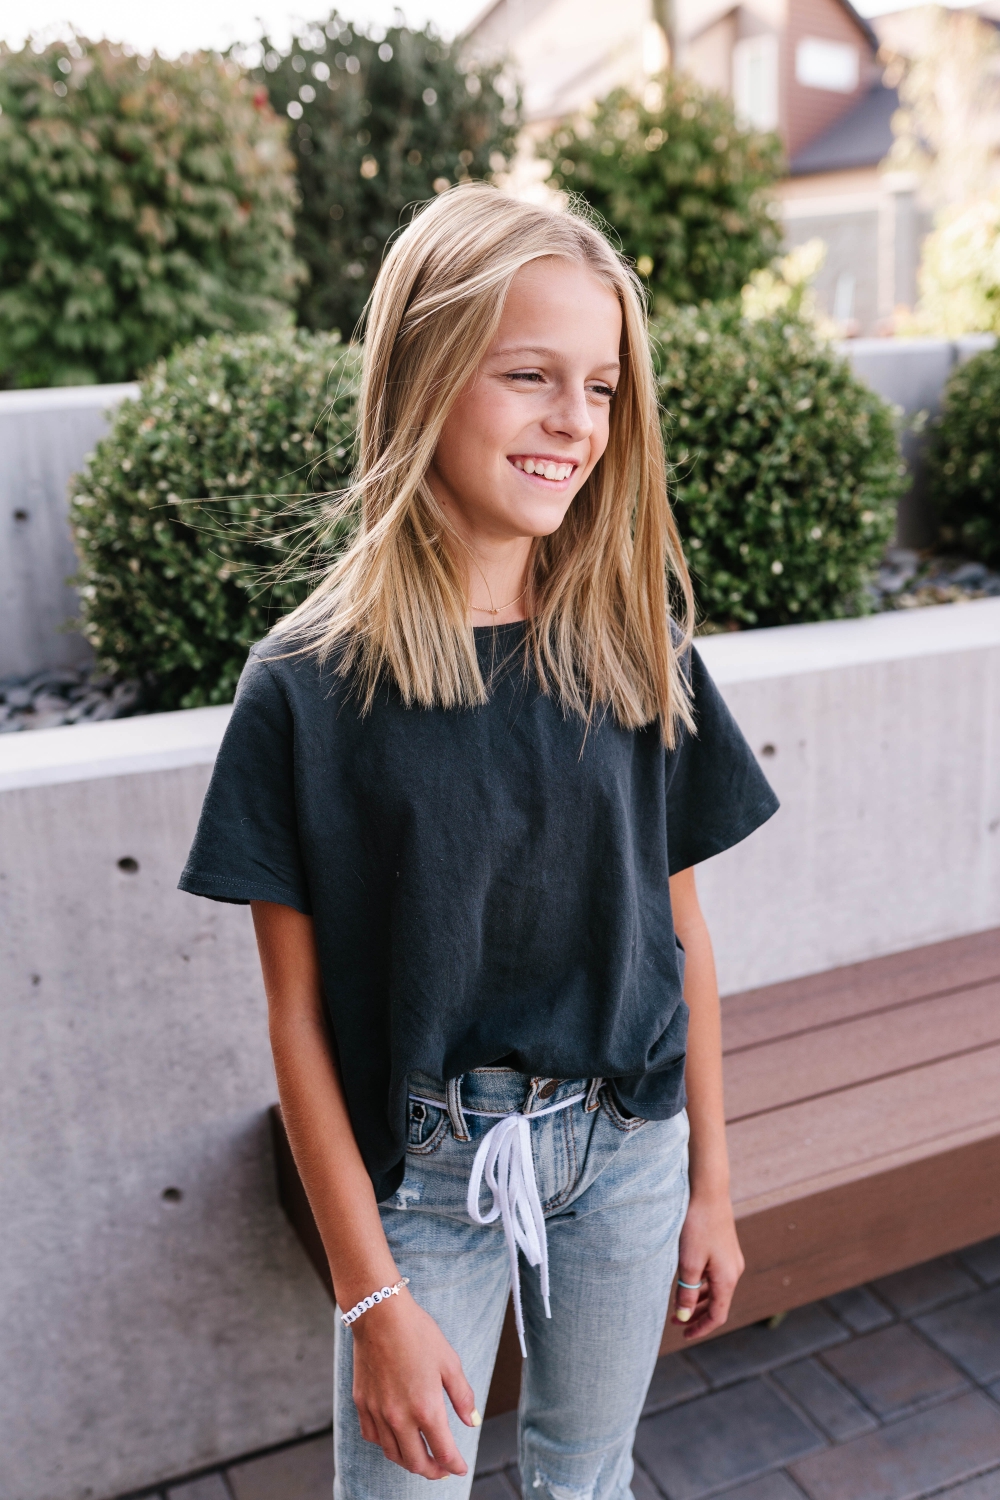 Where to Buy Nice Clothes for Tween/Teen Girls